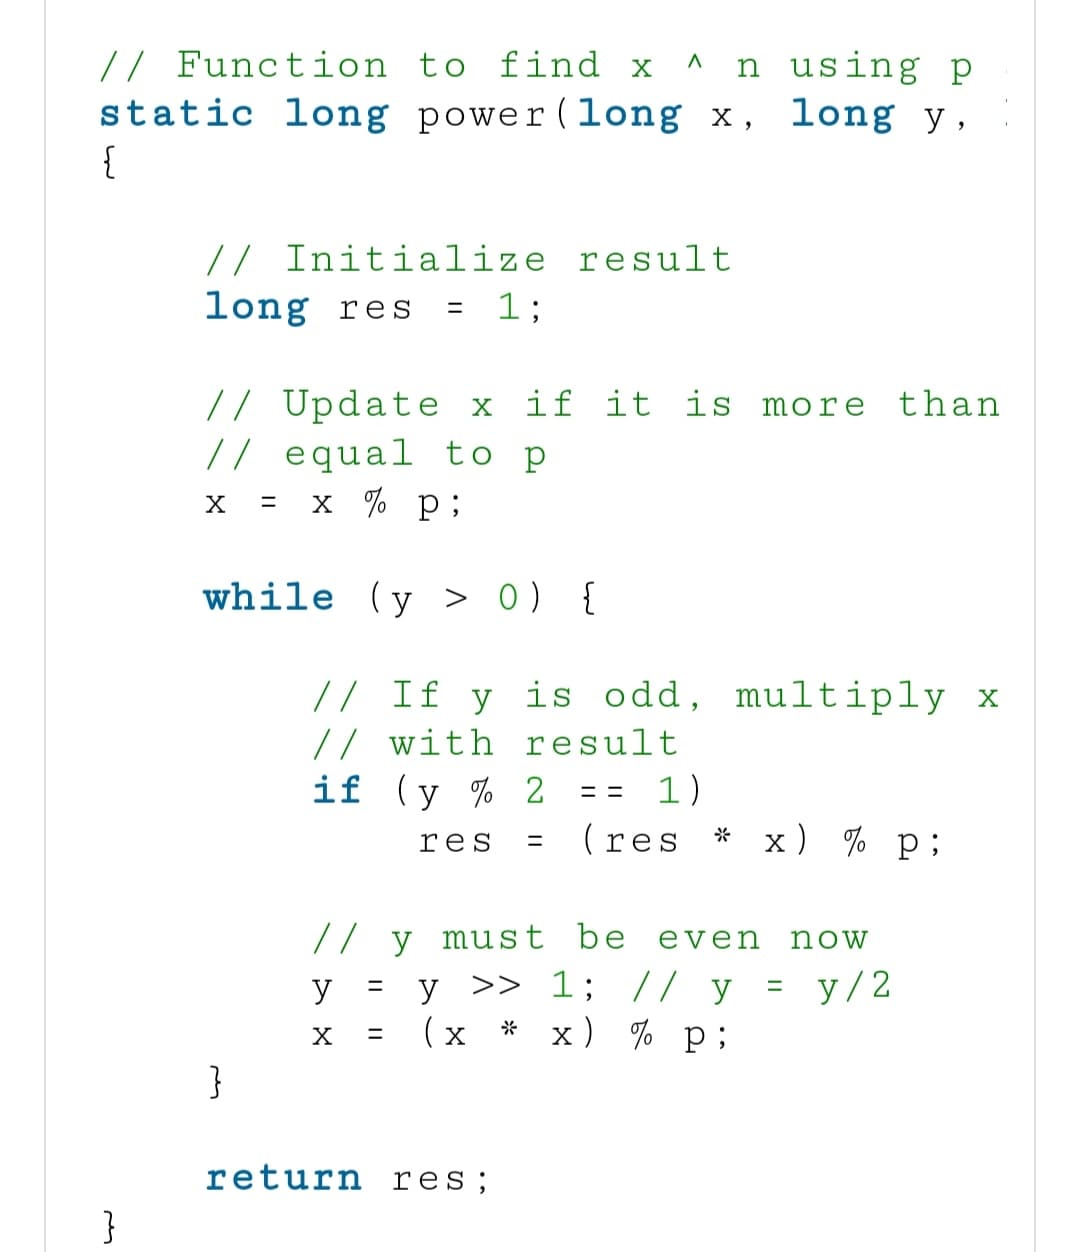 // Function to find x ^ n using p
static long power (long x,
long y,
{
}
// Initialize result
= 1;
long res
// Update x if it is more than
// equal to p
X
= x % p;
while (y > 0) {
}
// If y is odd, multiply x
// with result
if (y % 2
== 1)
res
(res x) % P;
y
X
// y must be even now
y >> 1; // y = y/2
(X)
*
x) % p;
=
=
=
return res;
*